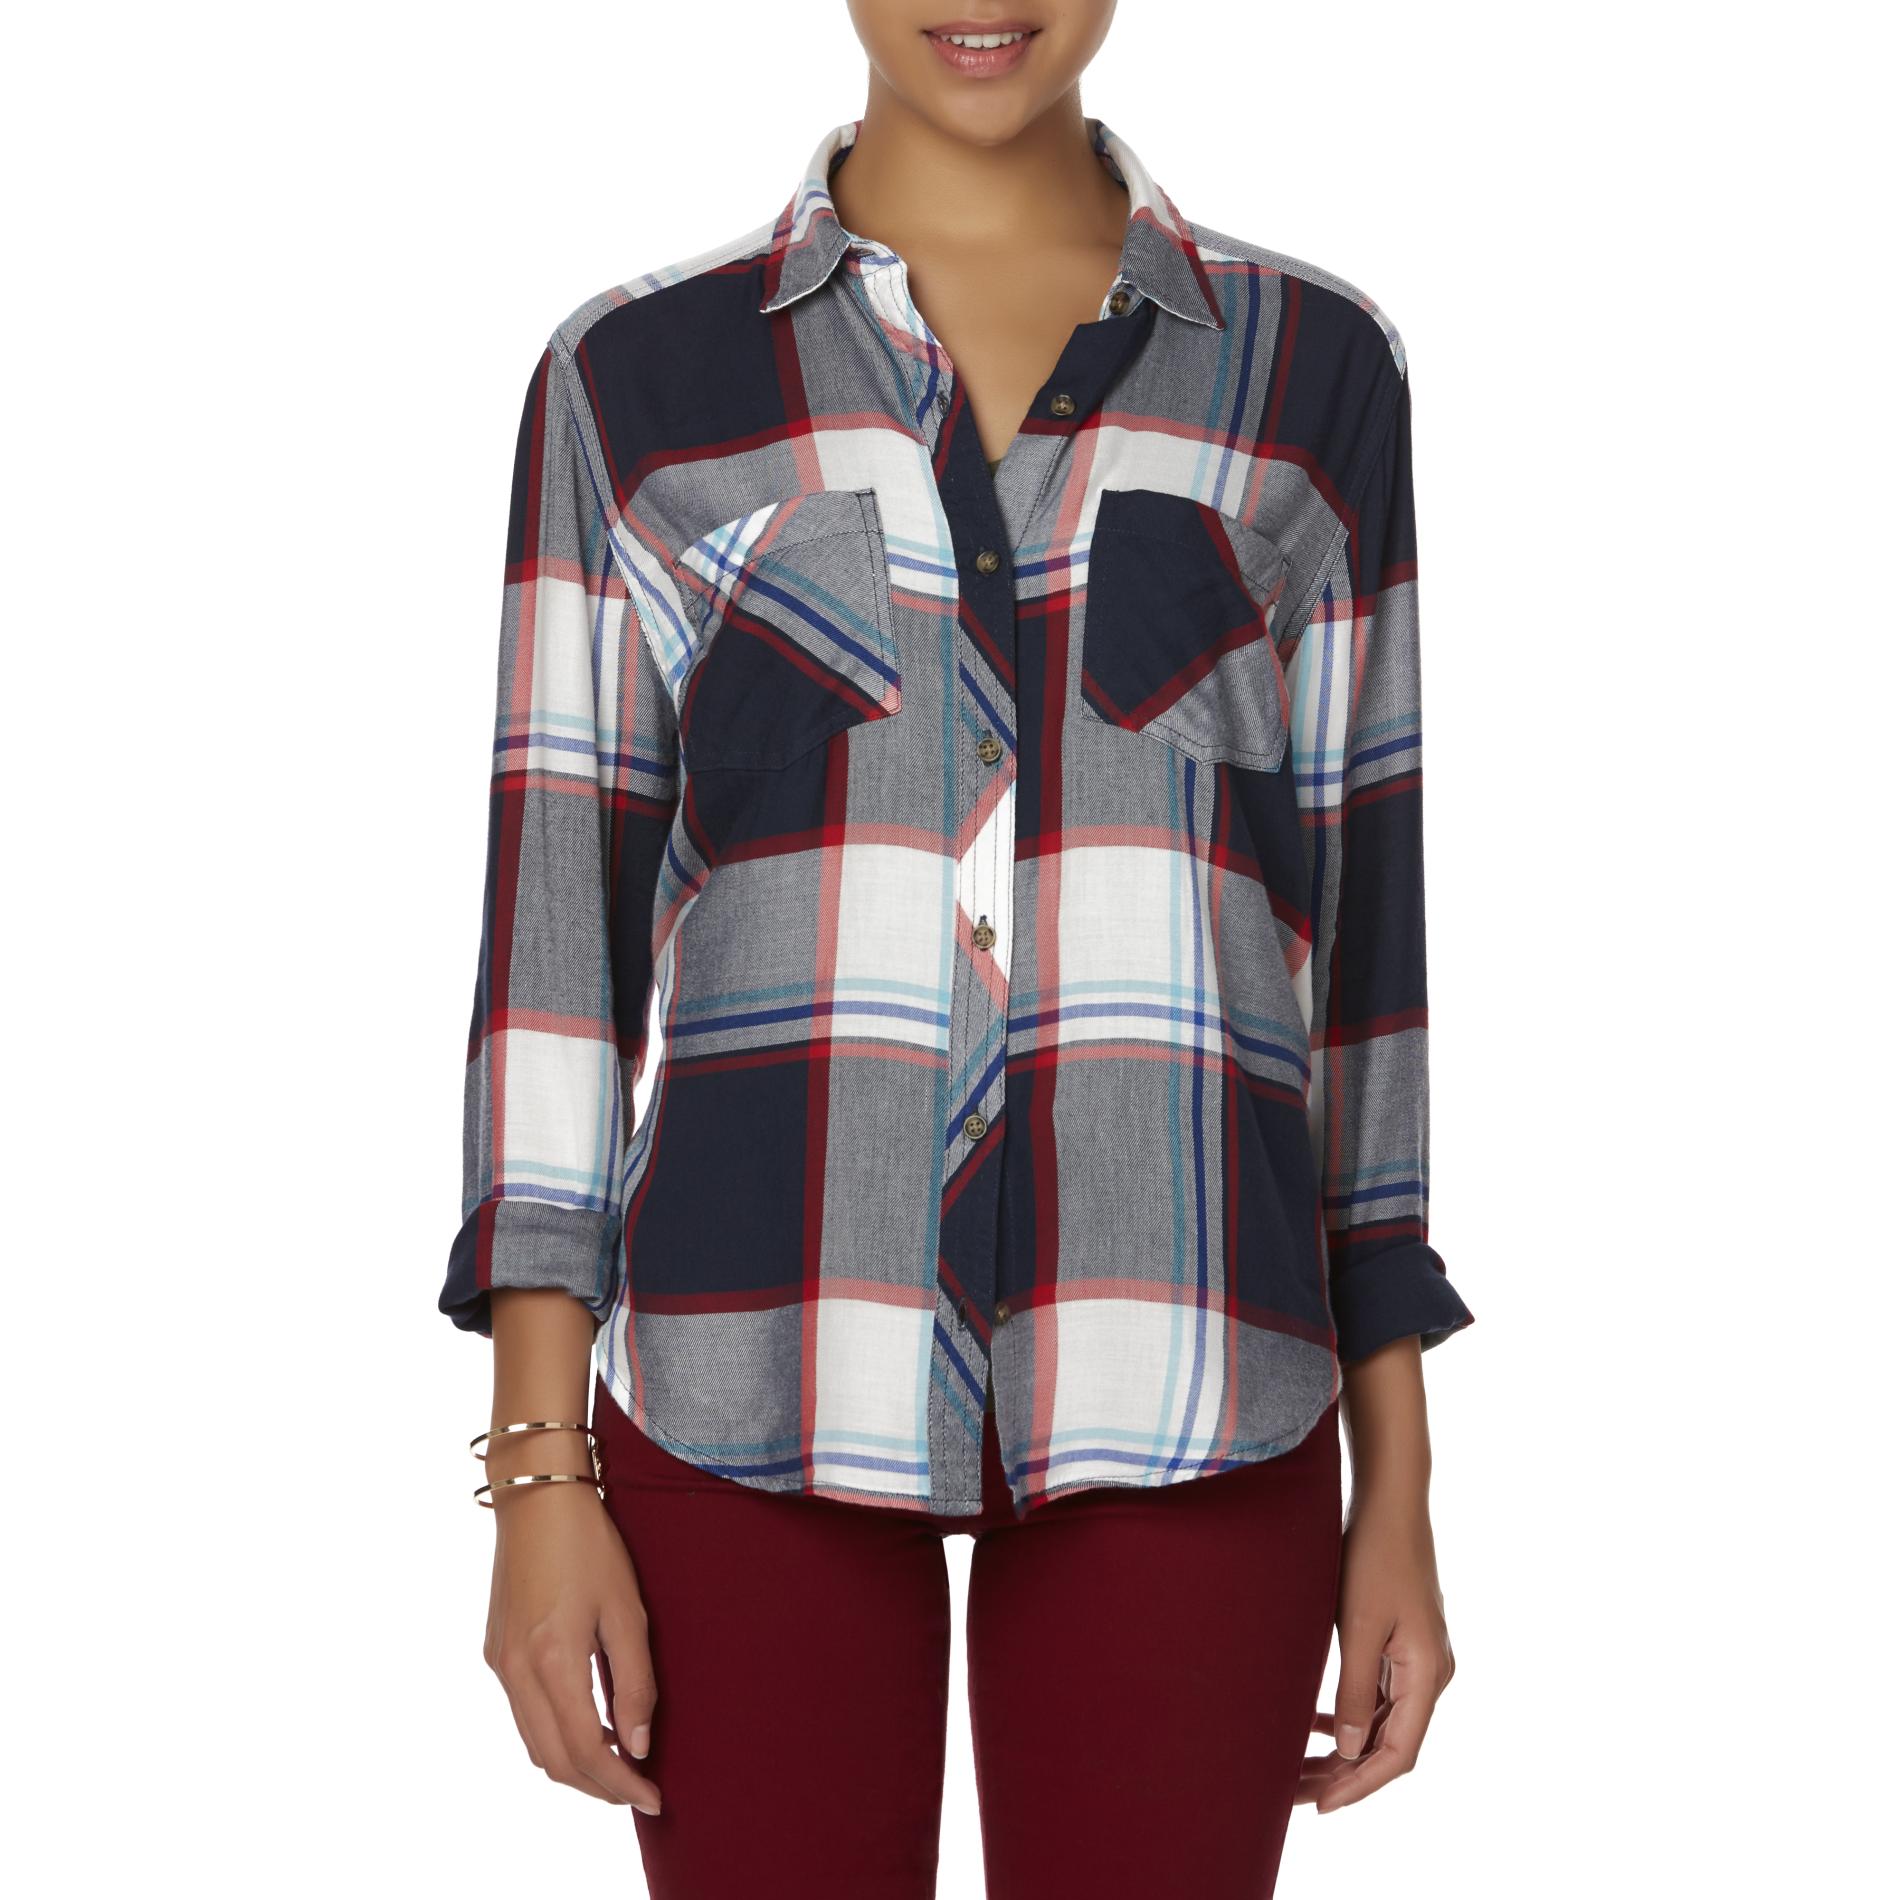 Simply Styled Women's Button-Front Shirt - Plaid